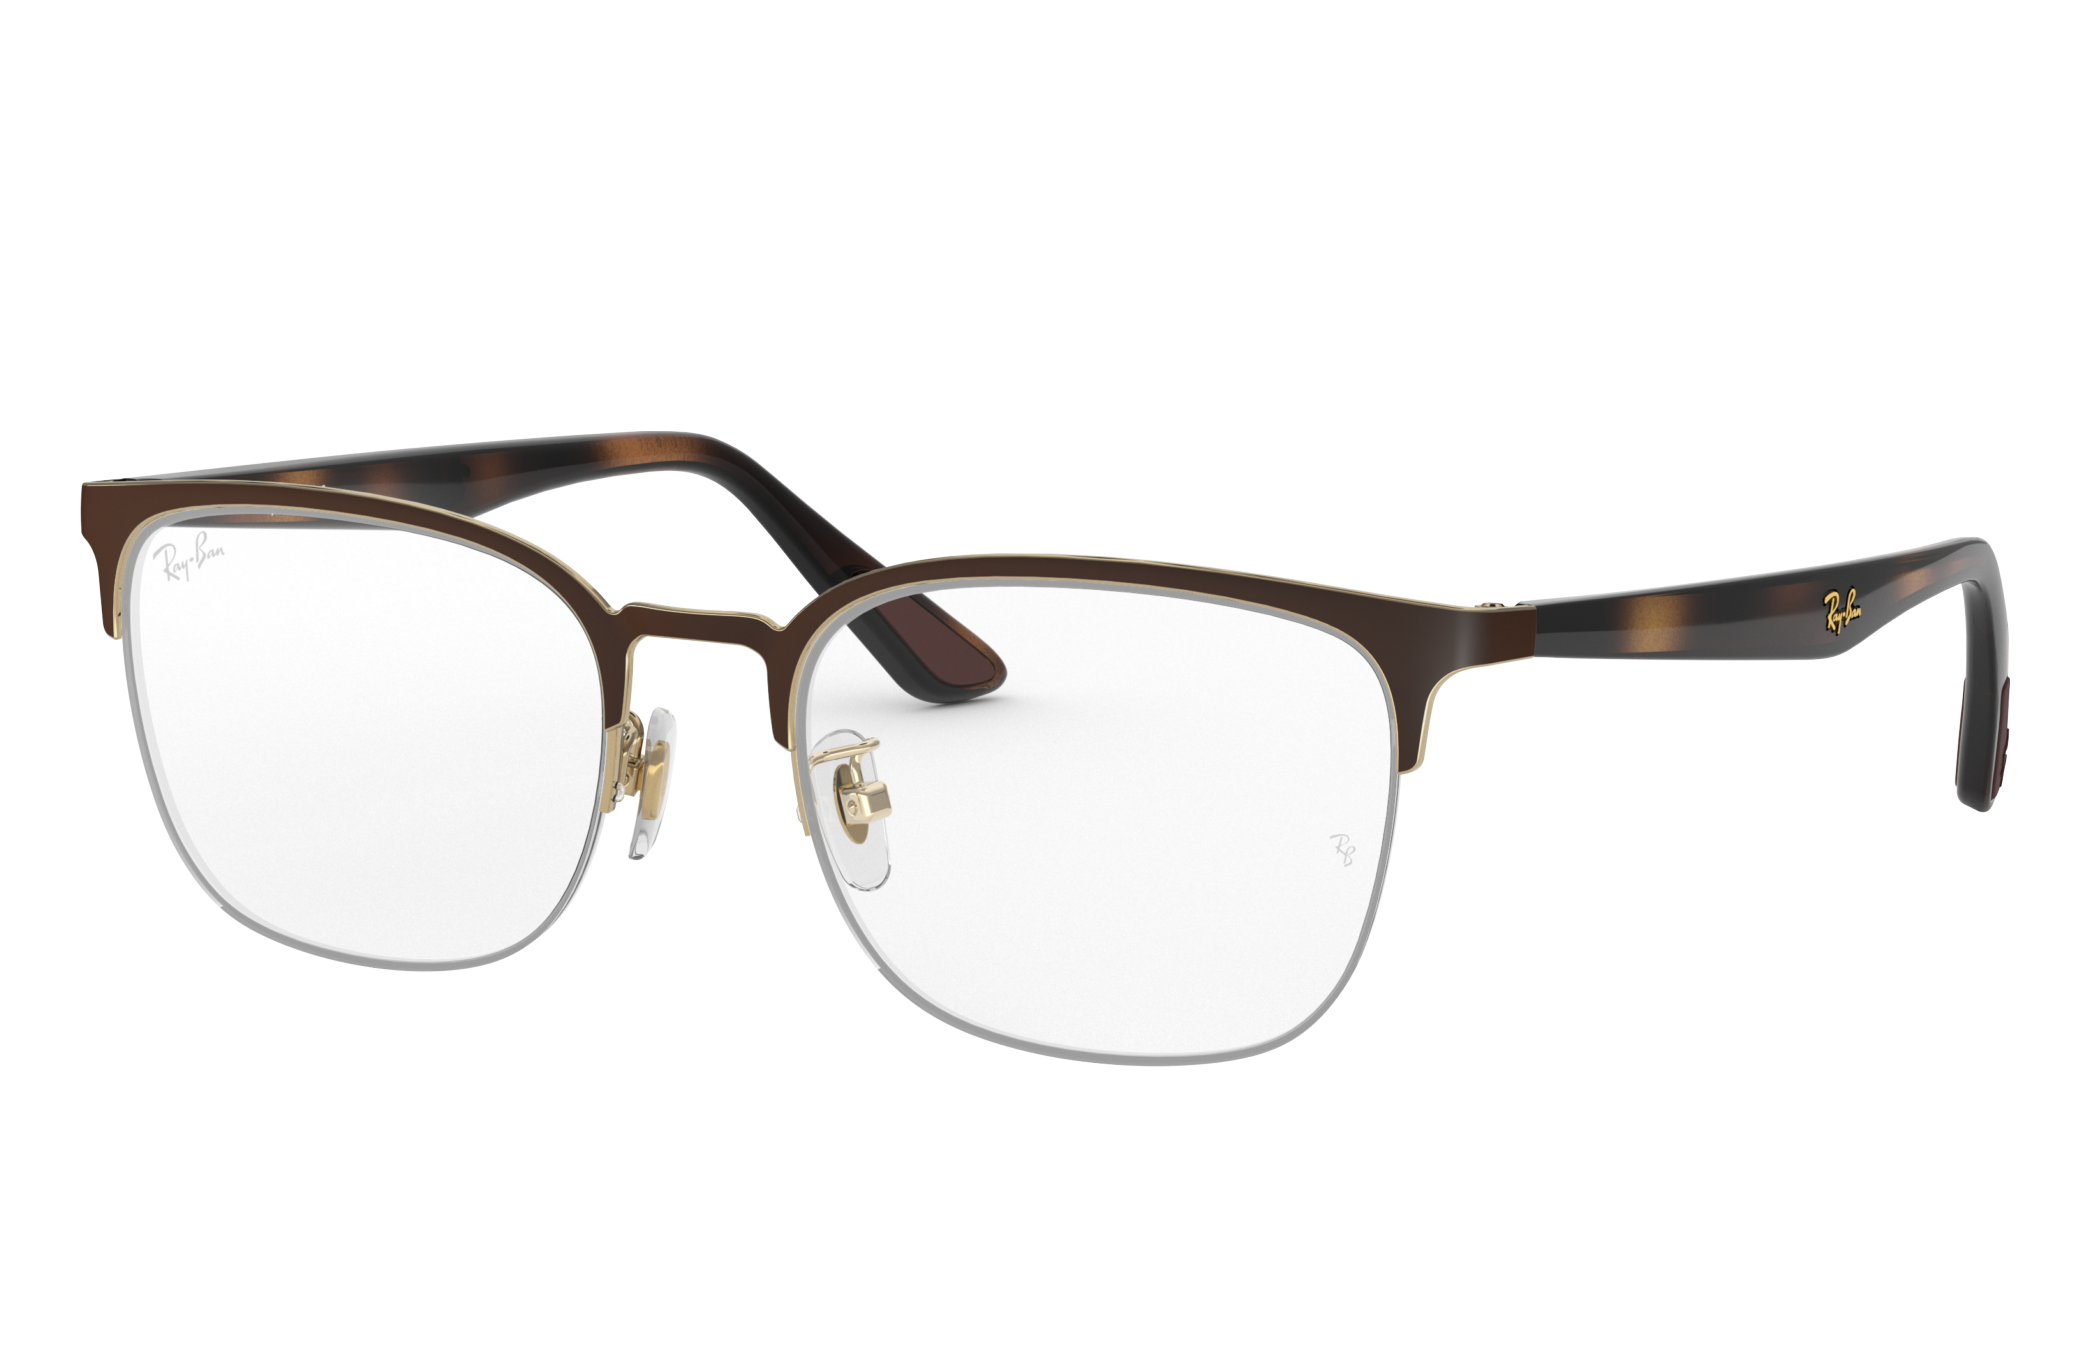 Rb6416d Eyeglasses with Brown Frame - RB6416D | Ray-Ban®